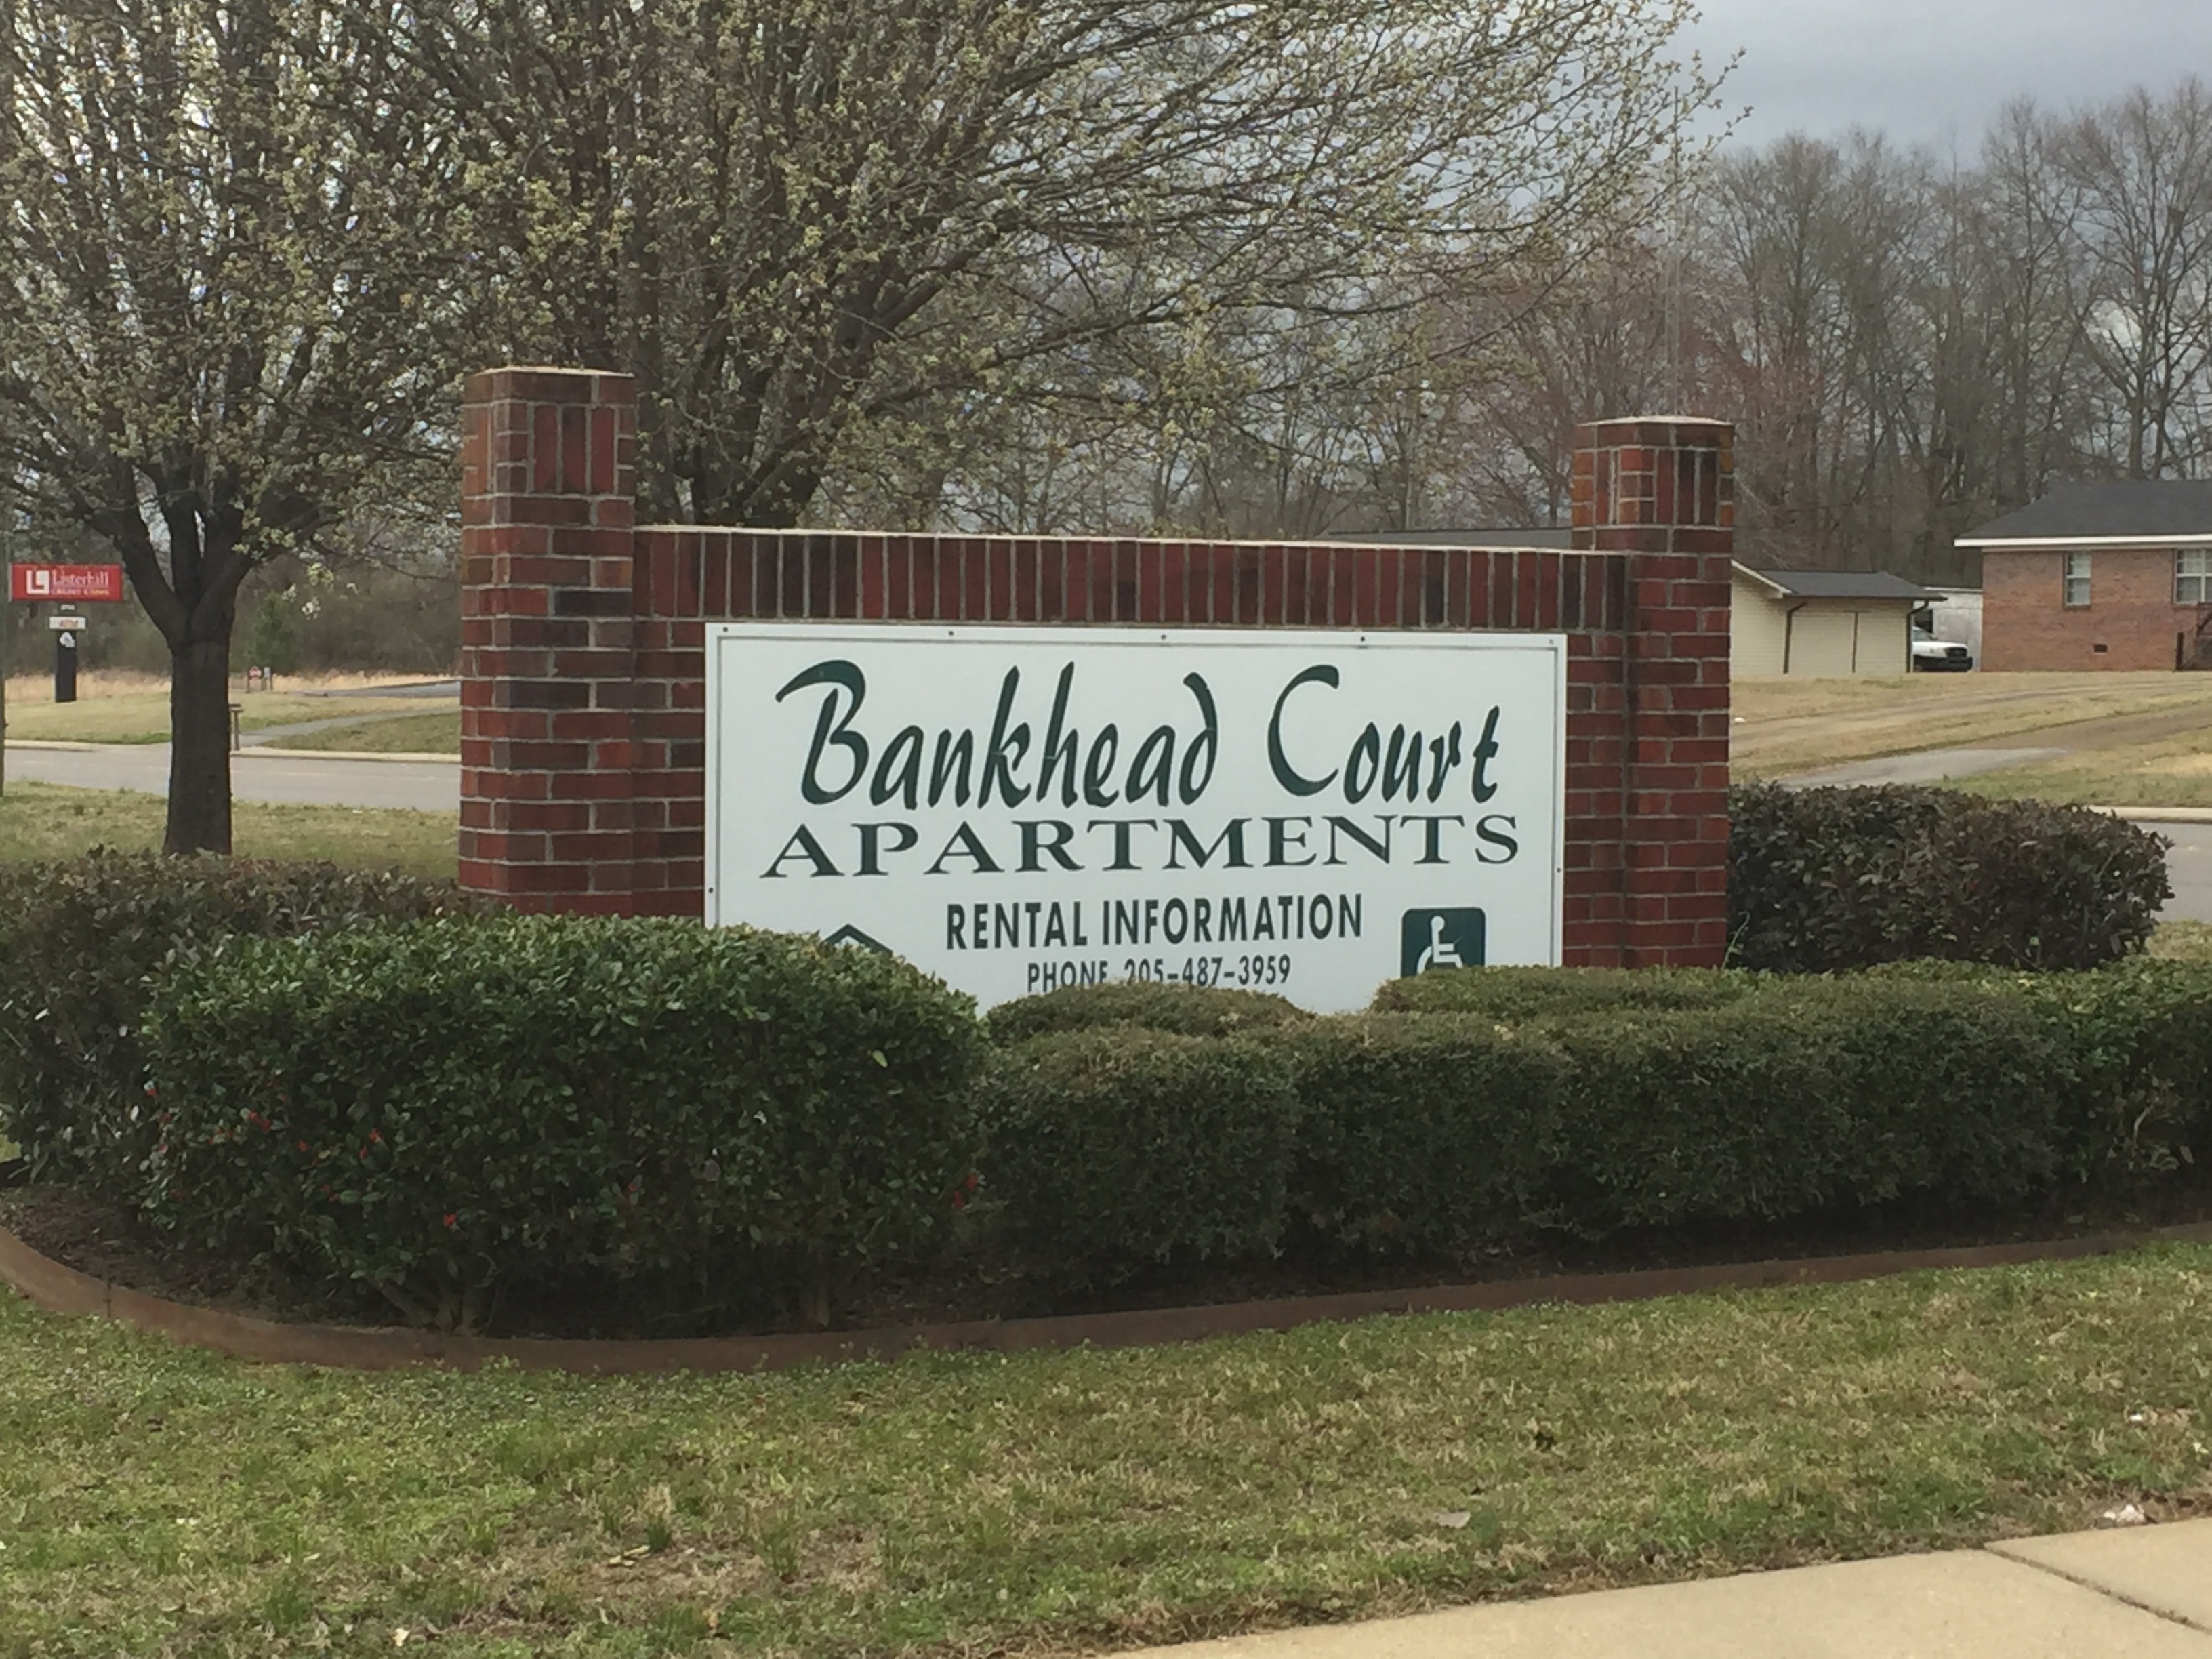 Bankhead Court [Marion County]